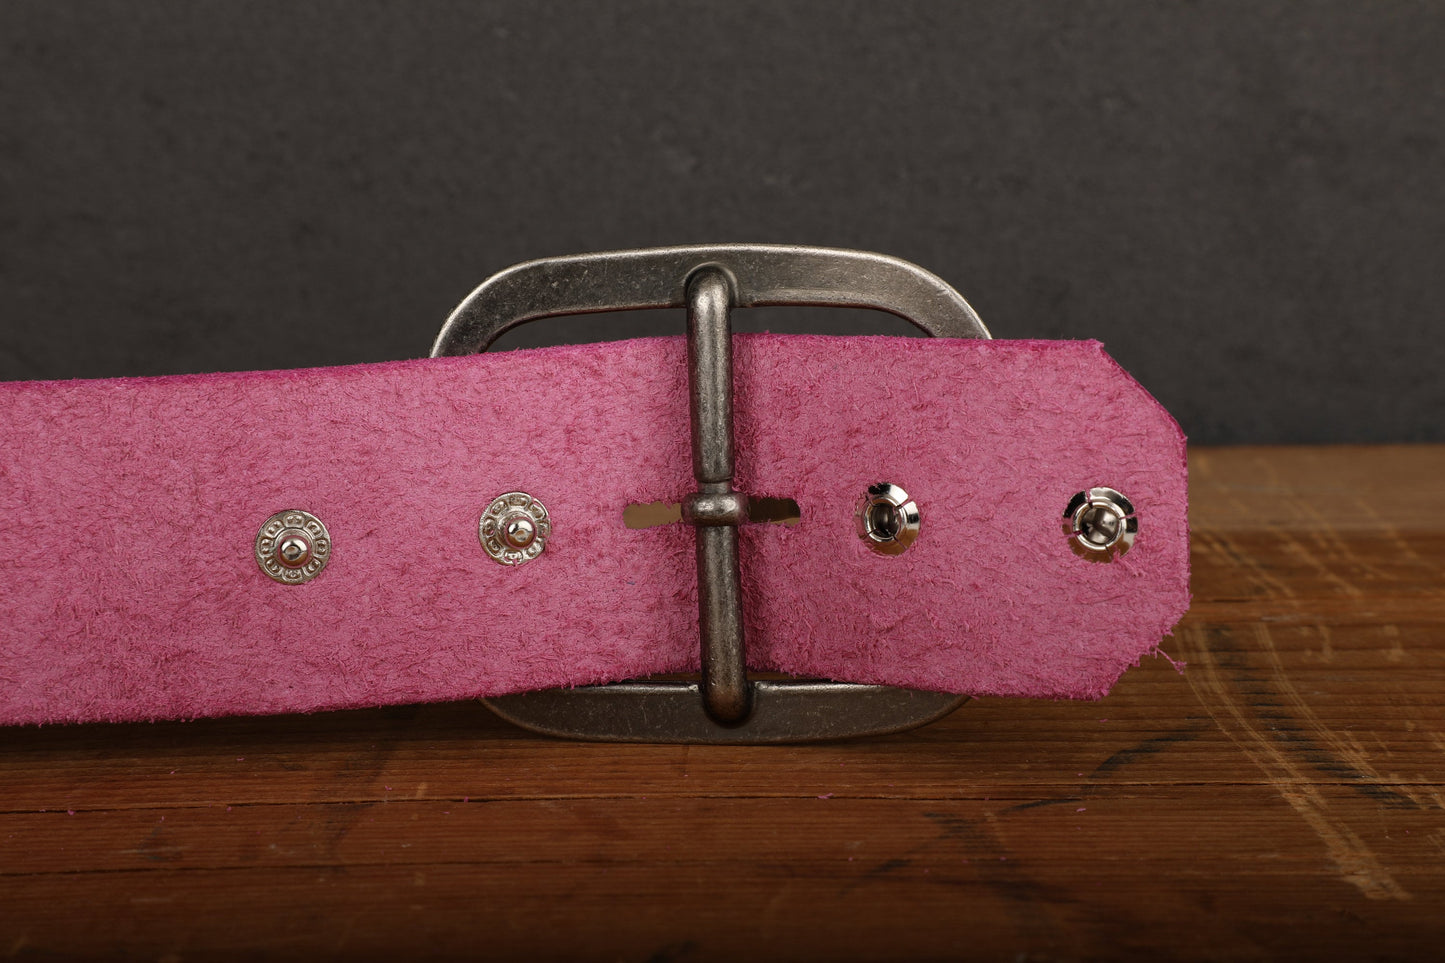 a close up of a pink belt on a wooden surface